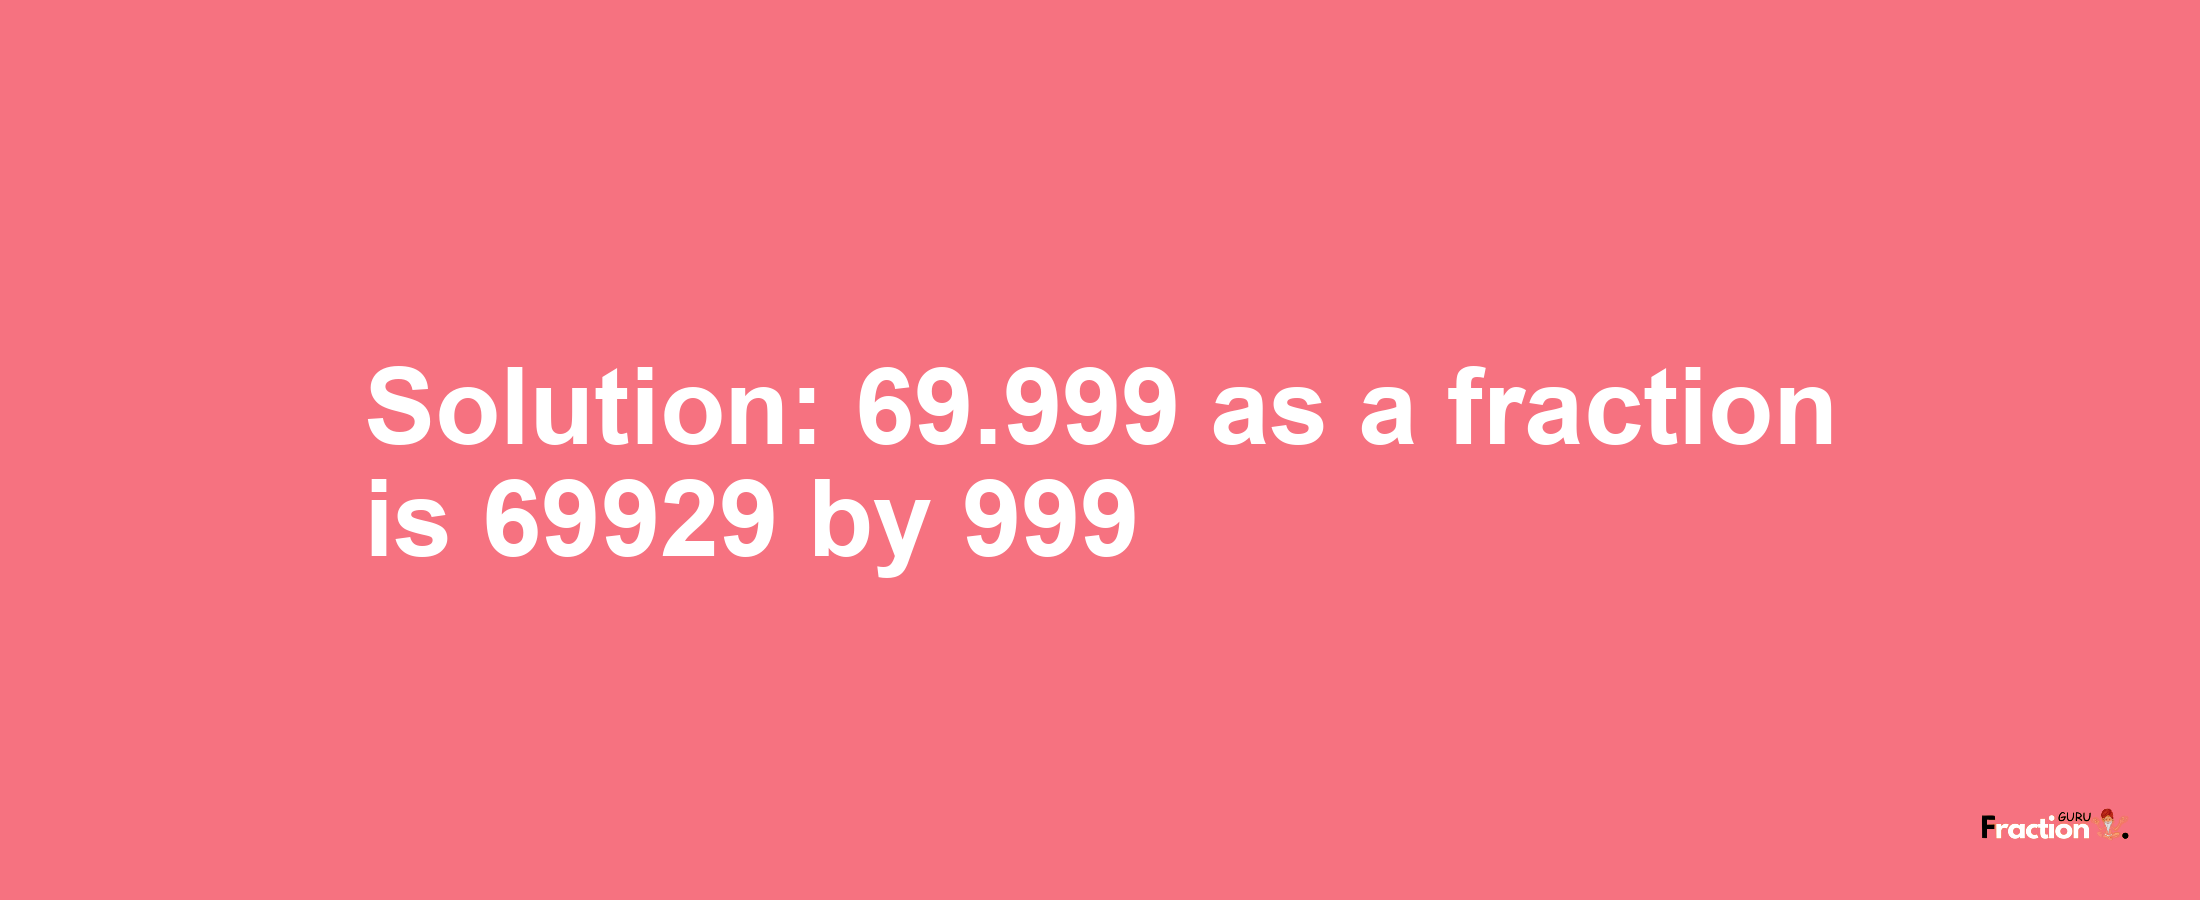 Solution:69.999 as a fraction is 69929/999